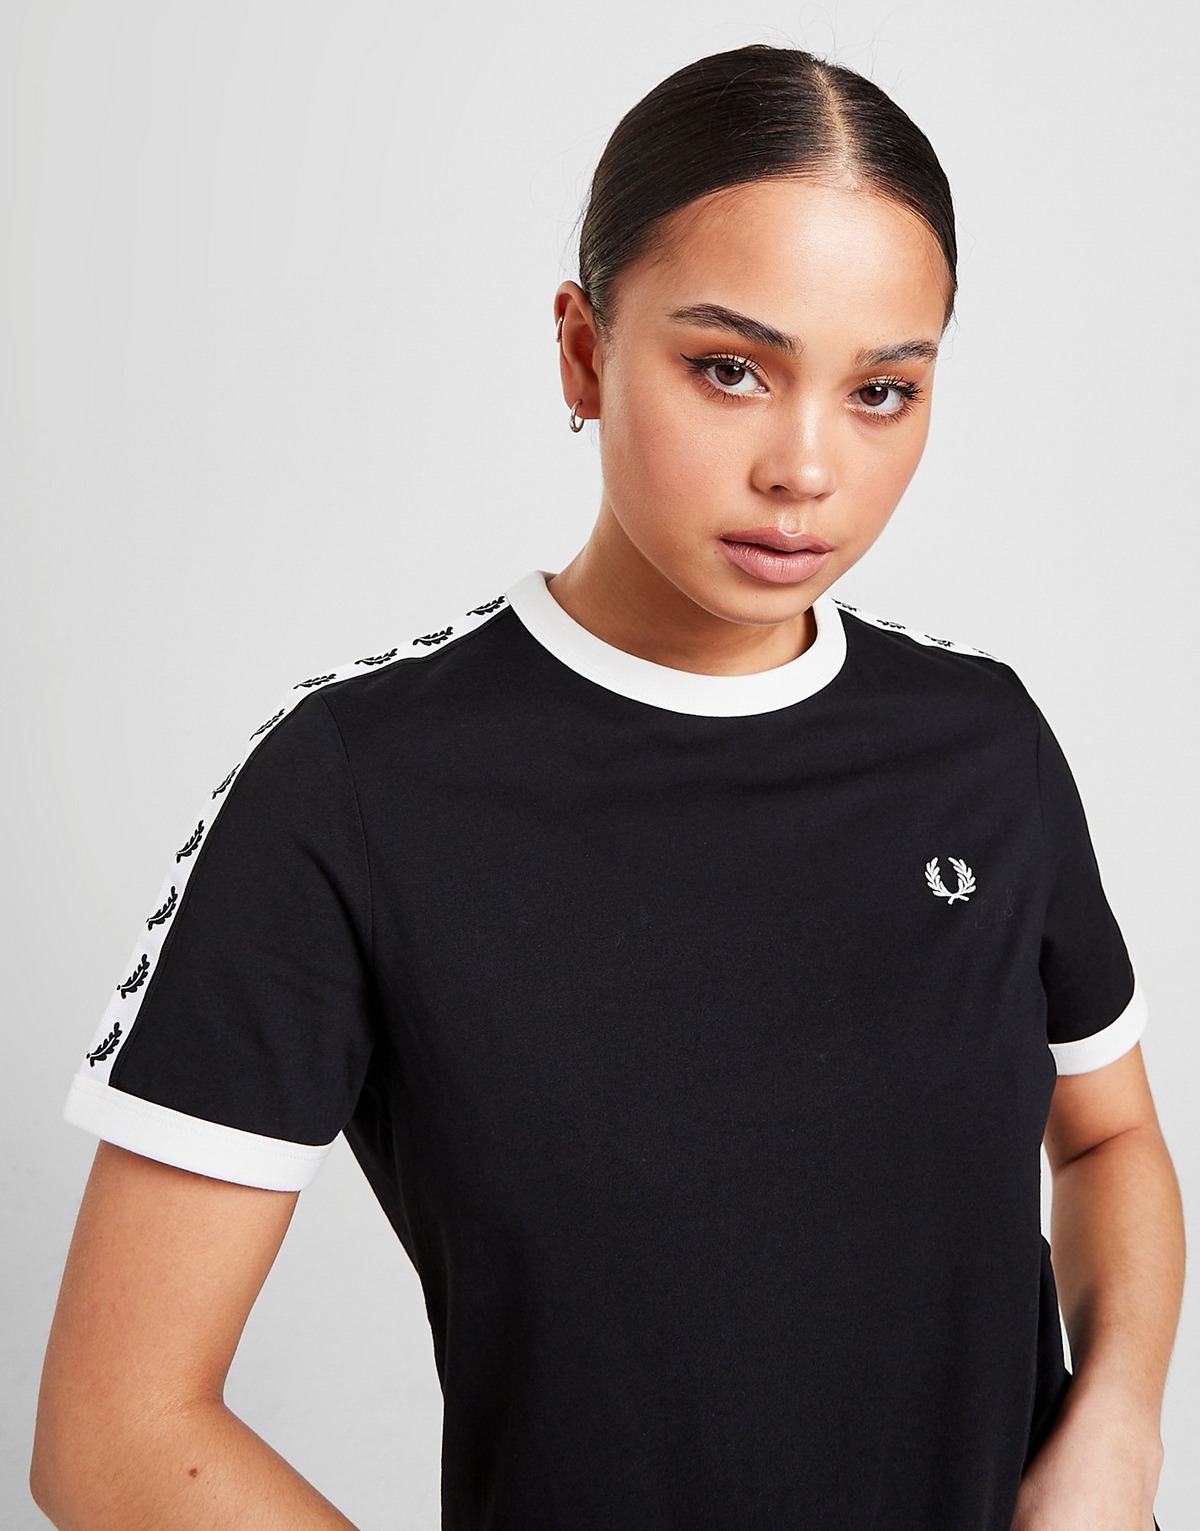 Fred Perry Tape Ringer T-Shirt Women's